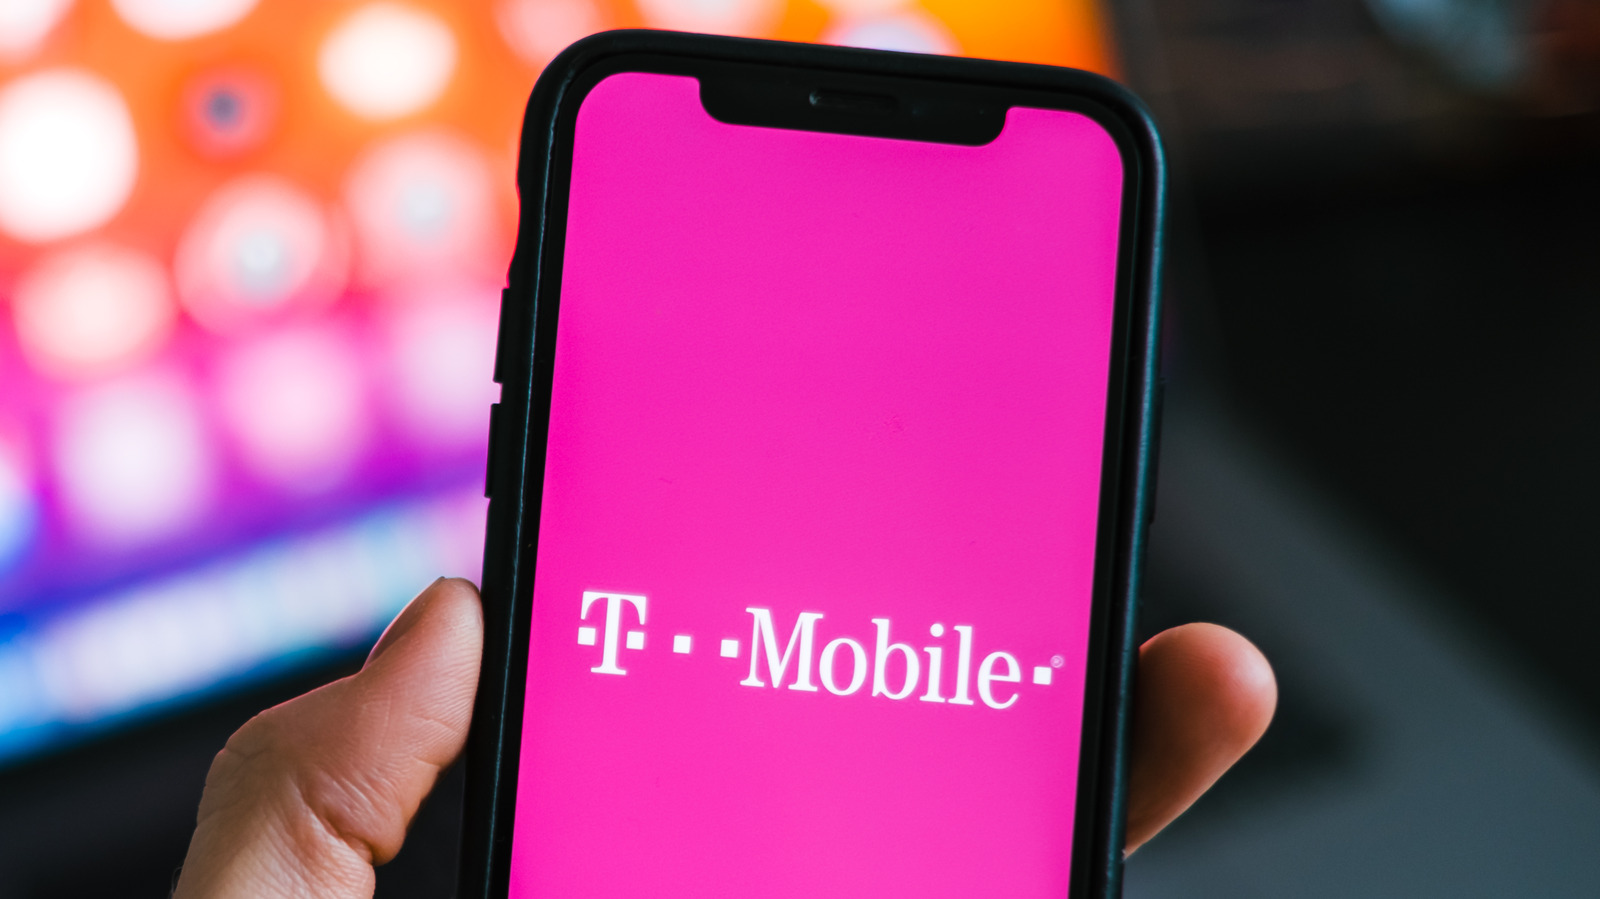 T-Mobile’s New Go5G Plus Plan Promises ‘Phone Freedom’ With Two-Year Upgrades – SlashGear